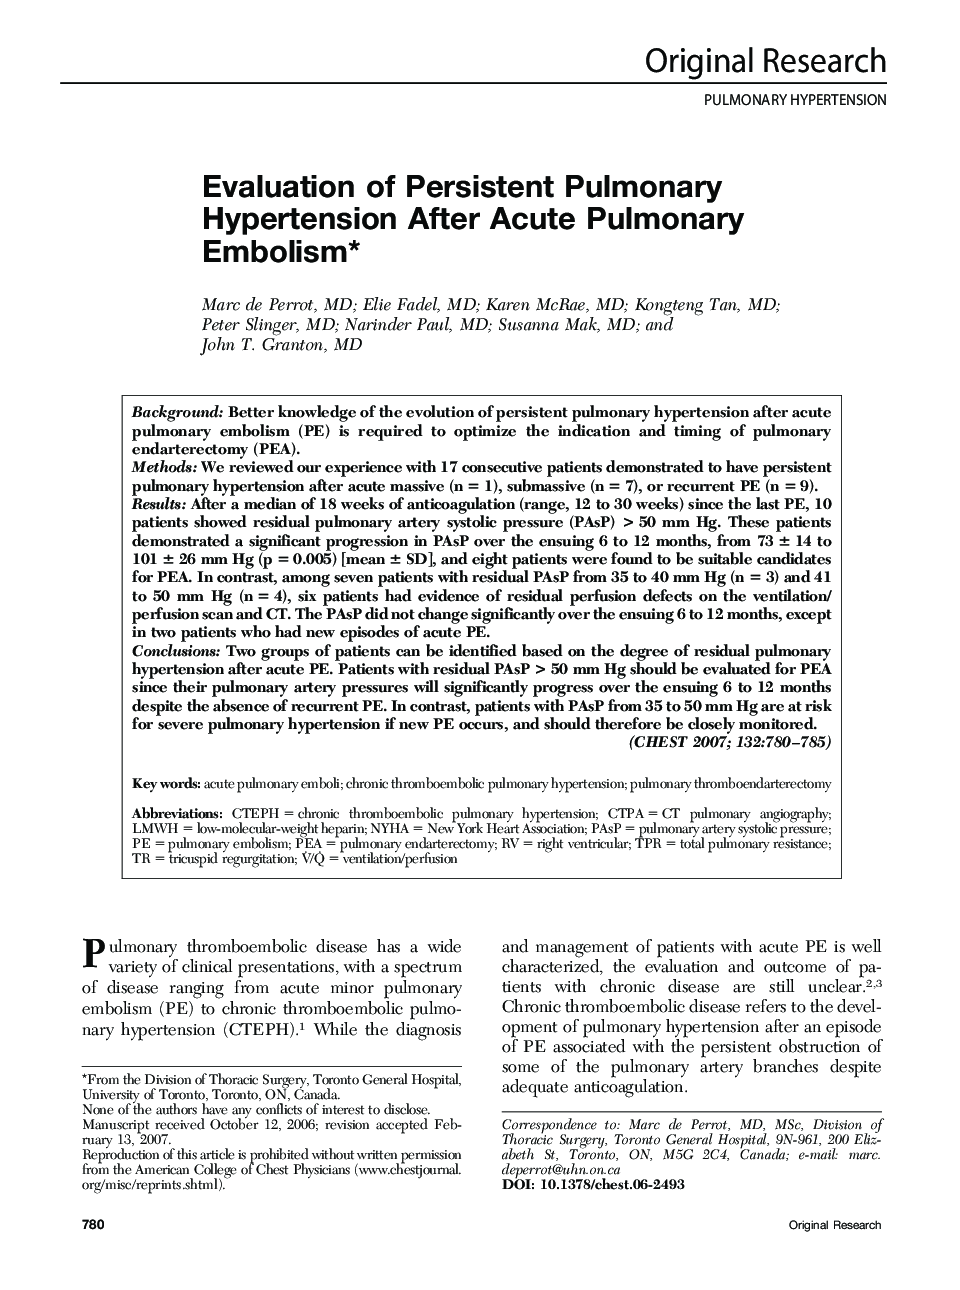 Evaluation of Persistent Pulmonary Hypertension After Acute Pulmonary Embolism 